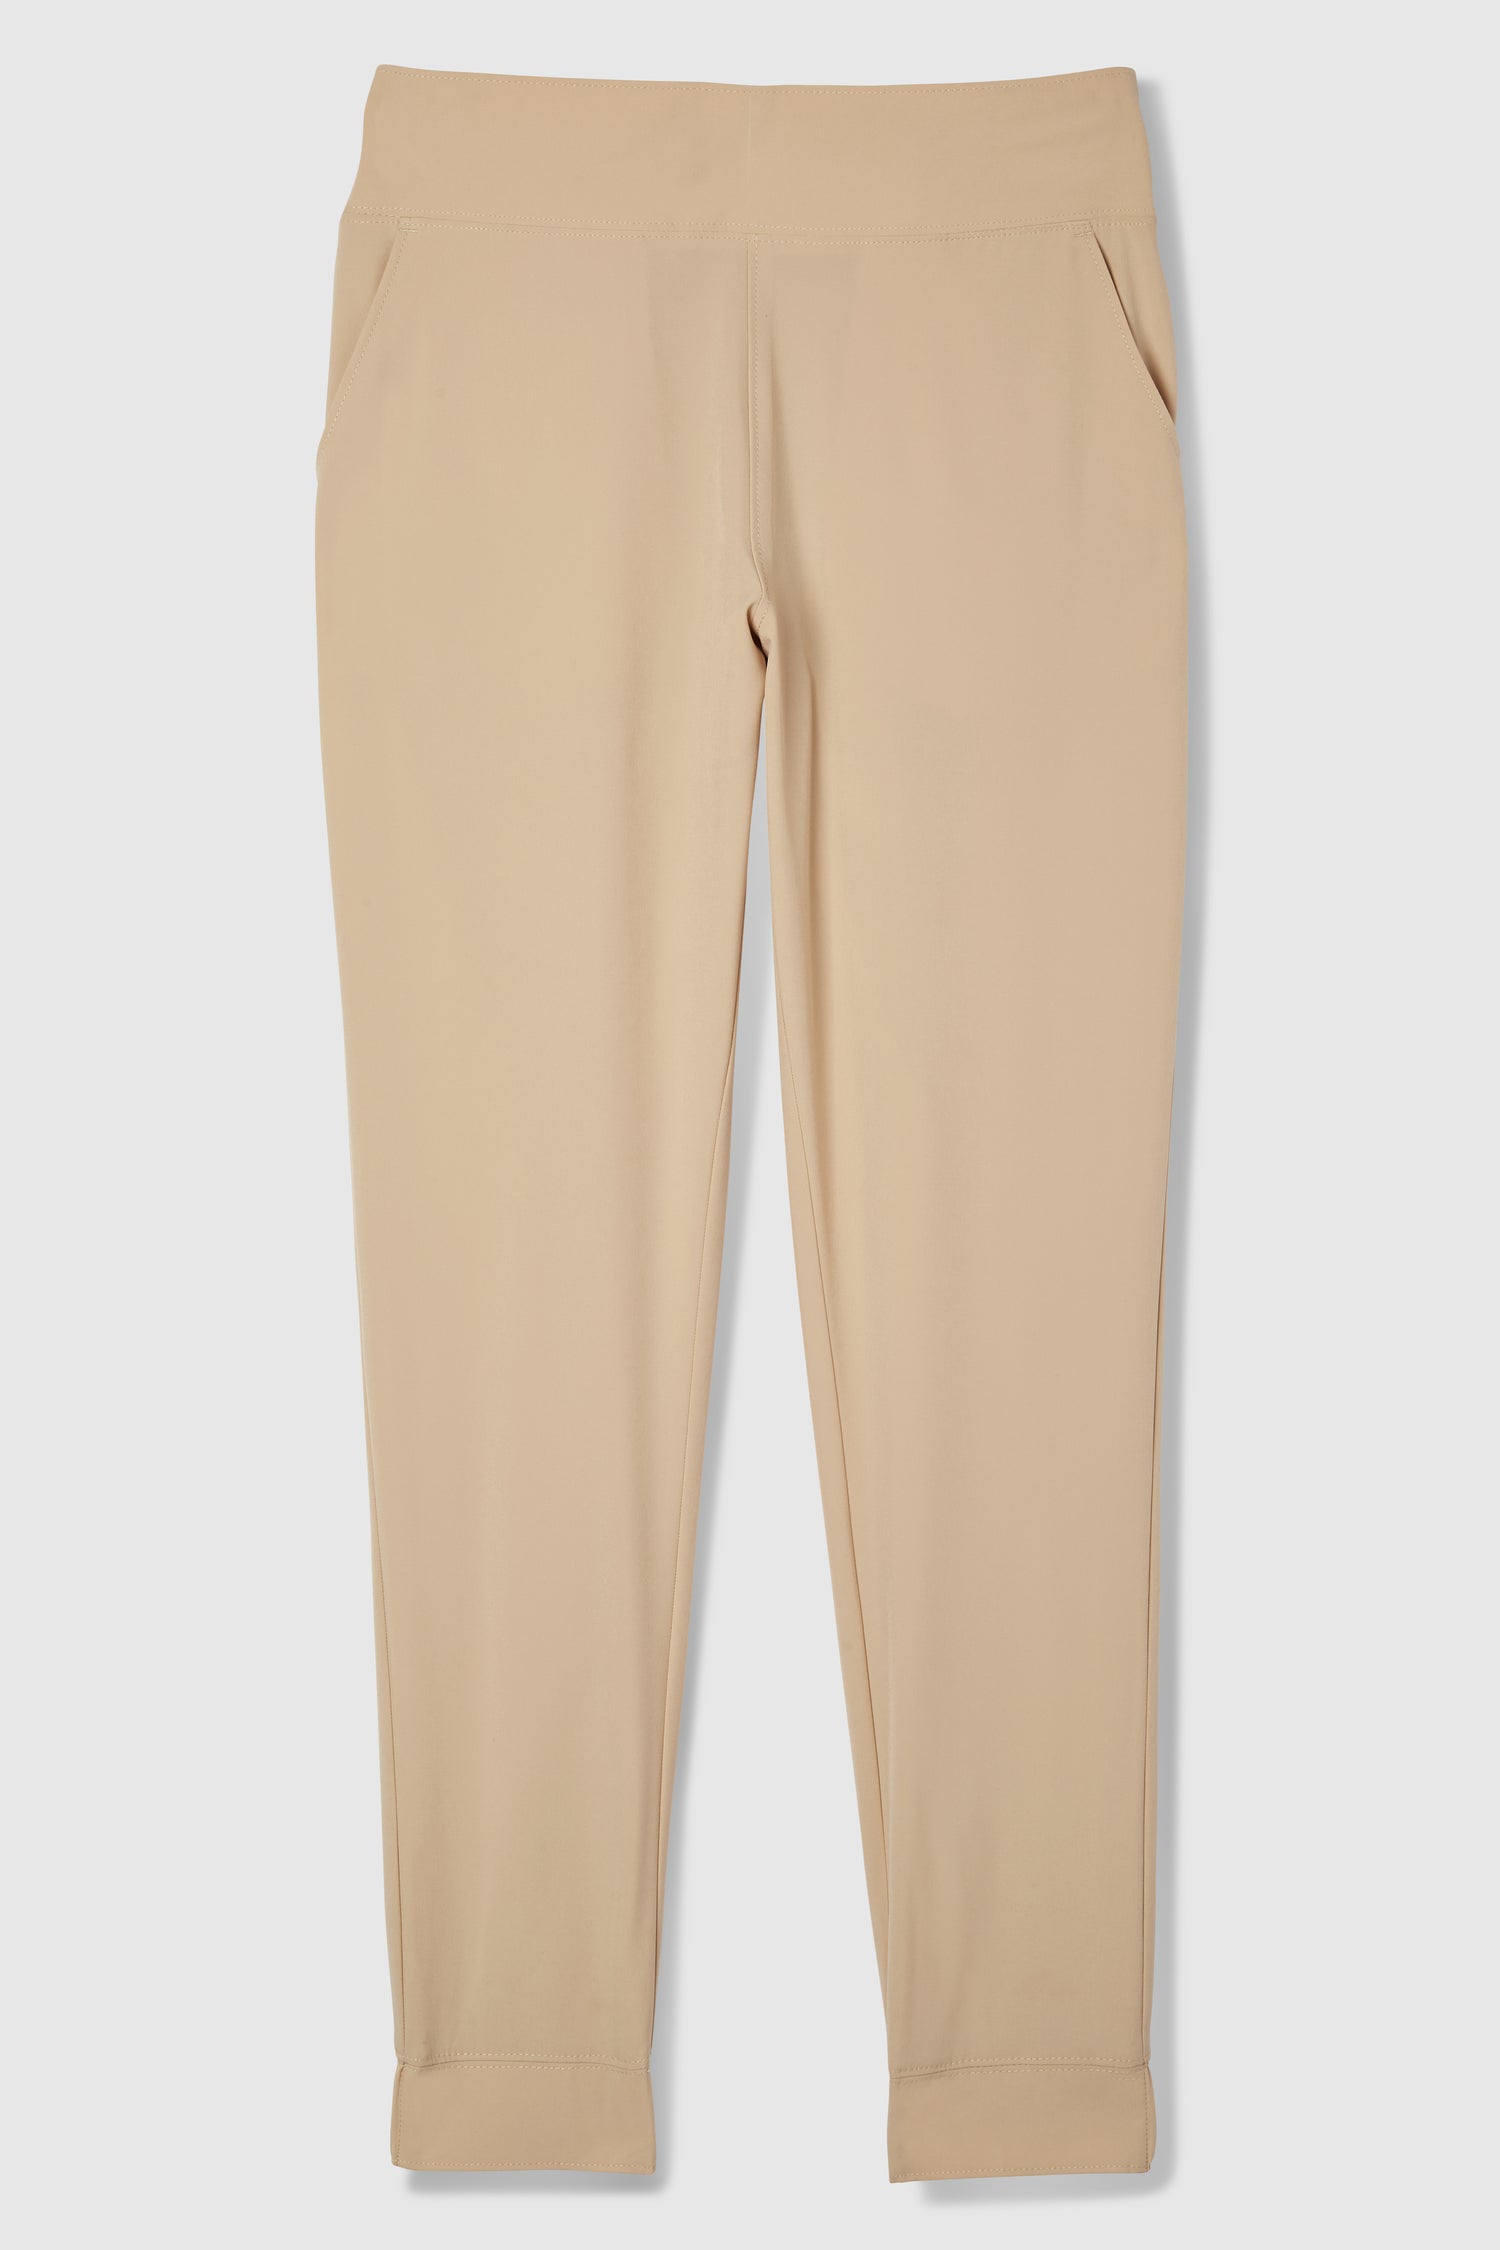 FWD Women's Core Stretch Woven Pant